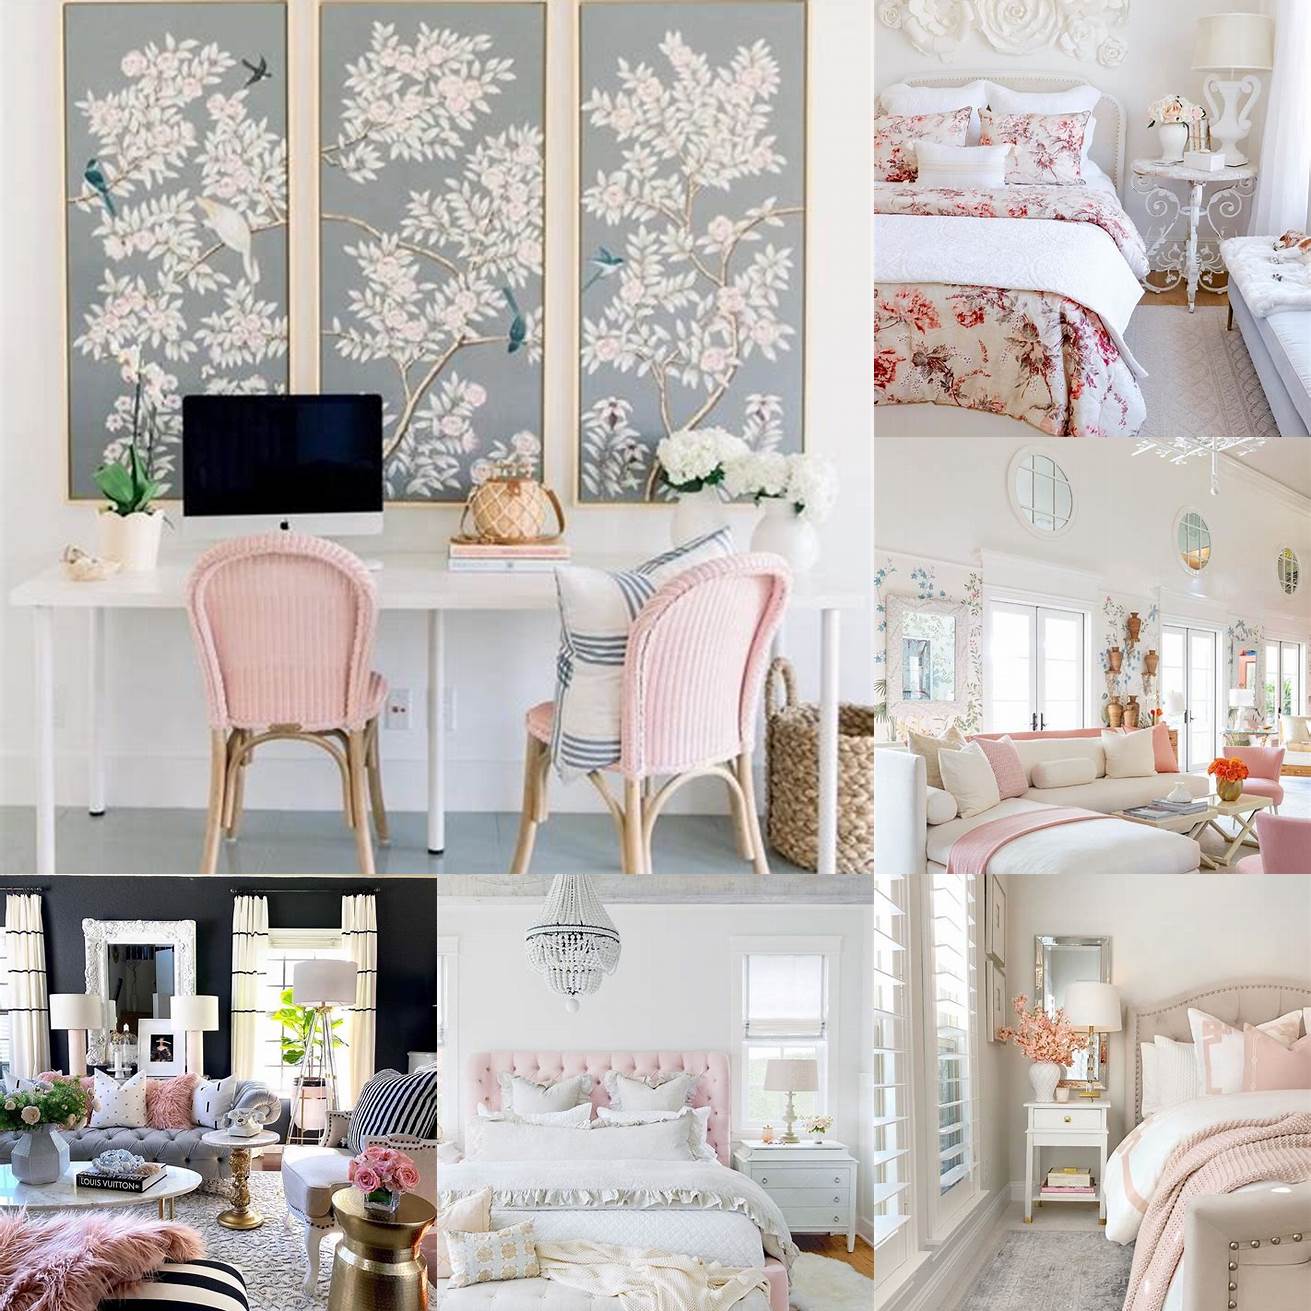 Floral patterns add a pop of color and femininity to your space